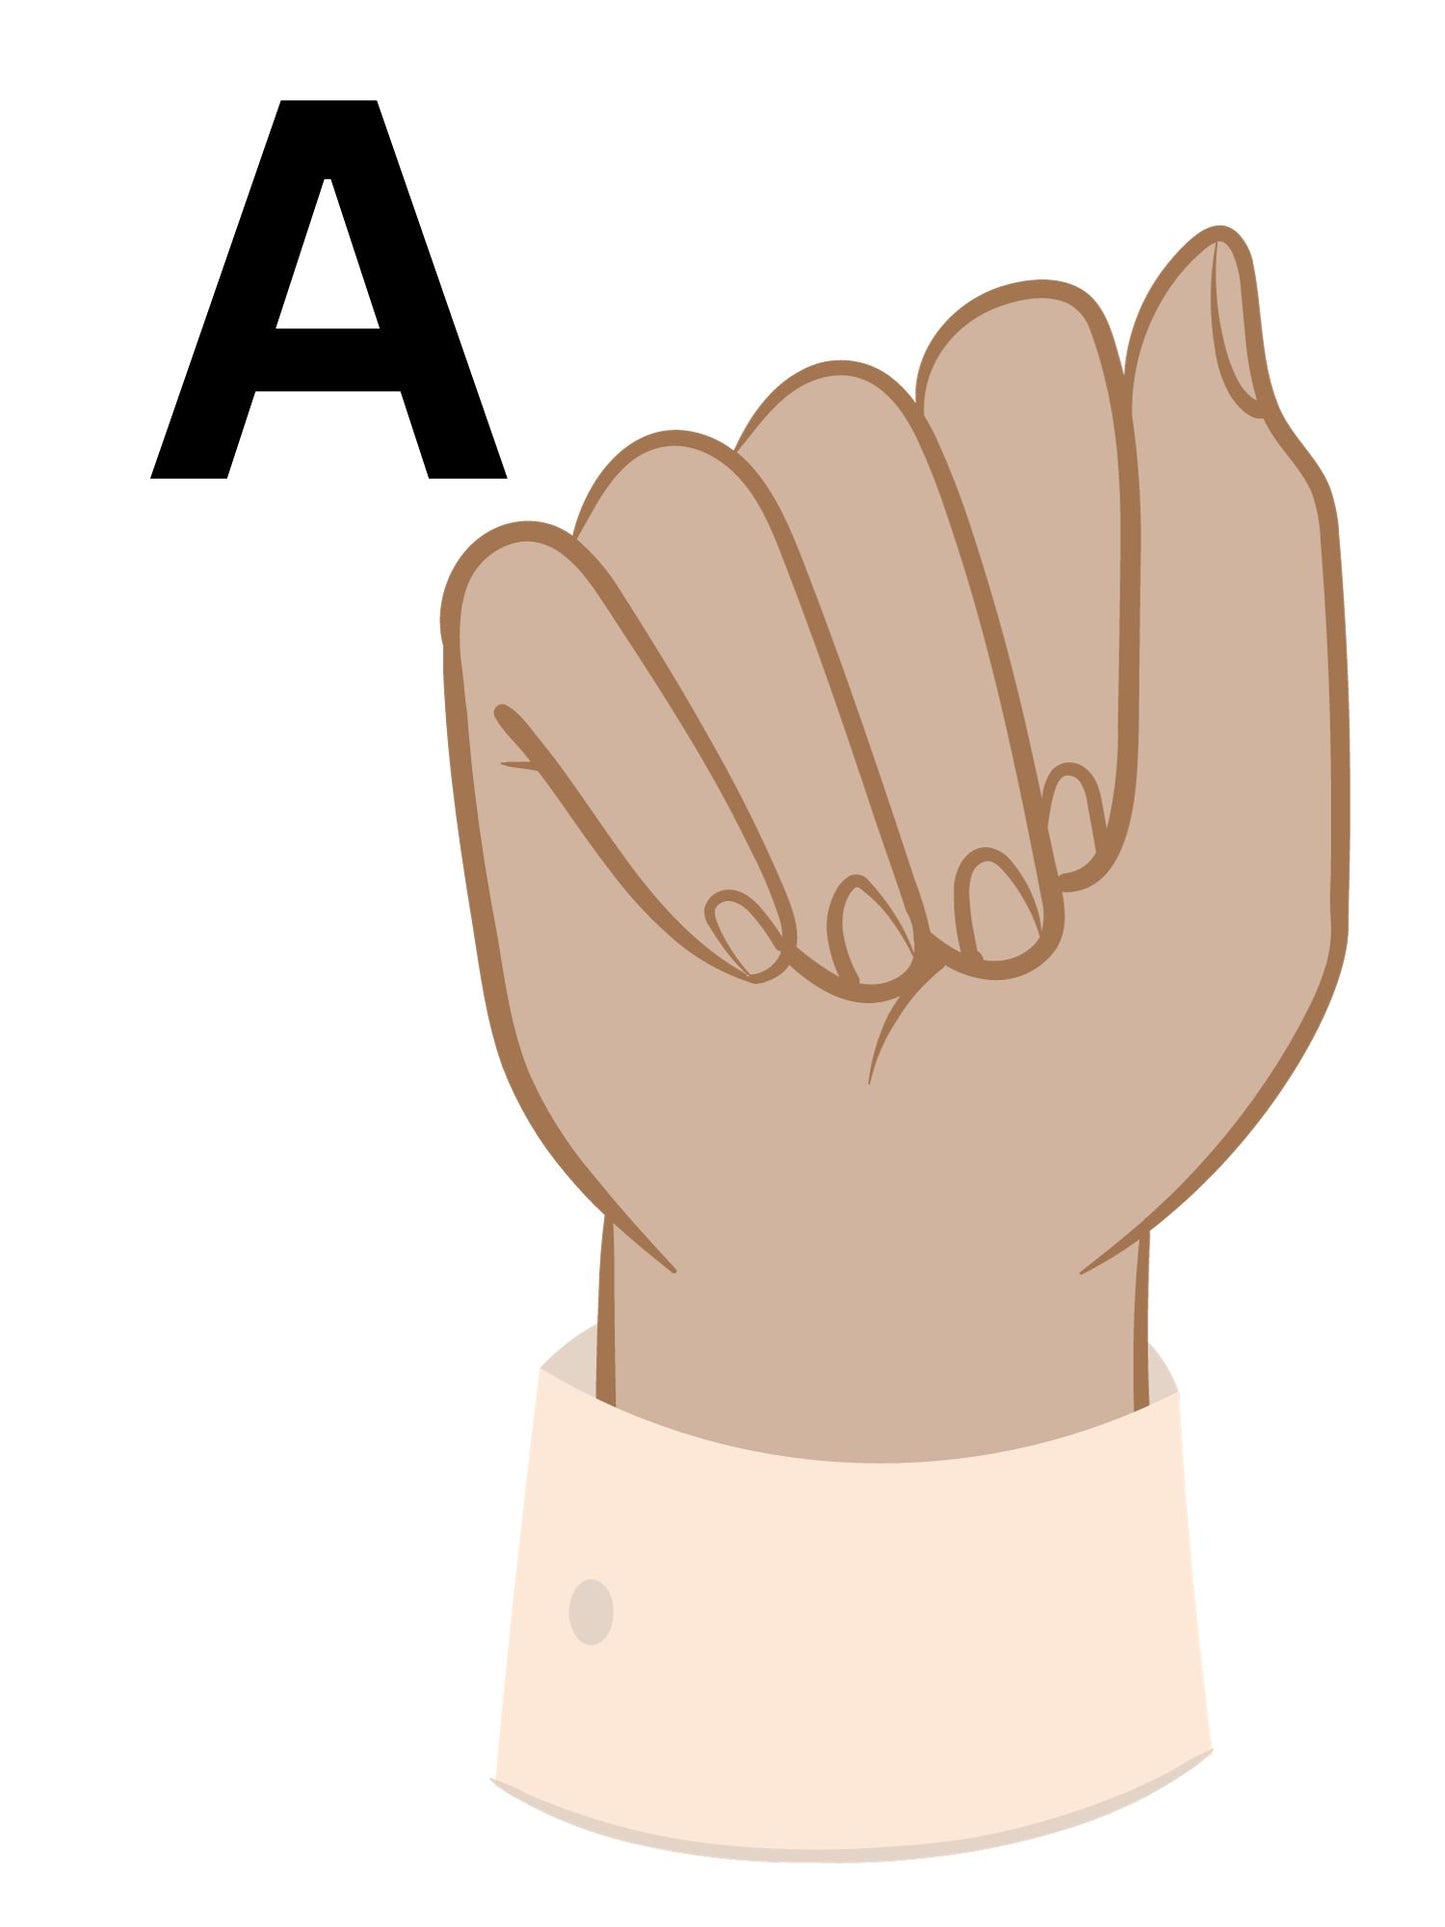 Let's Learn the Alphabet in American Sign Language©️